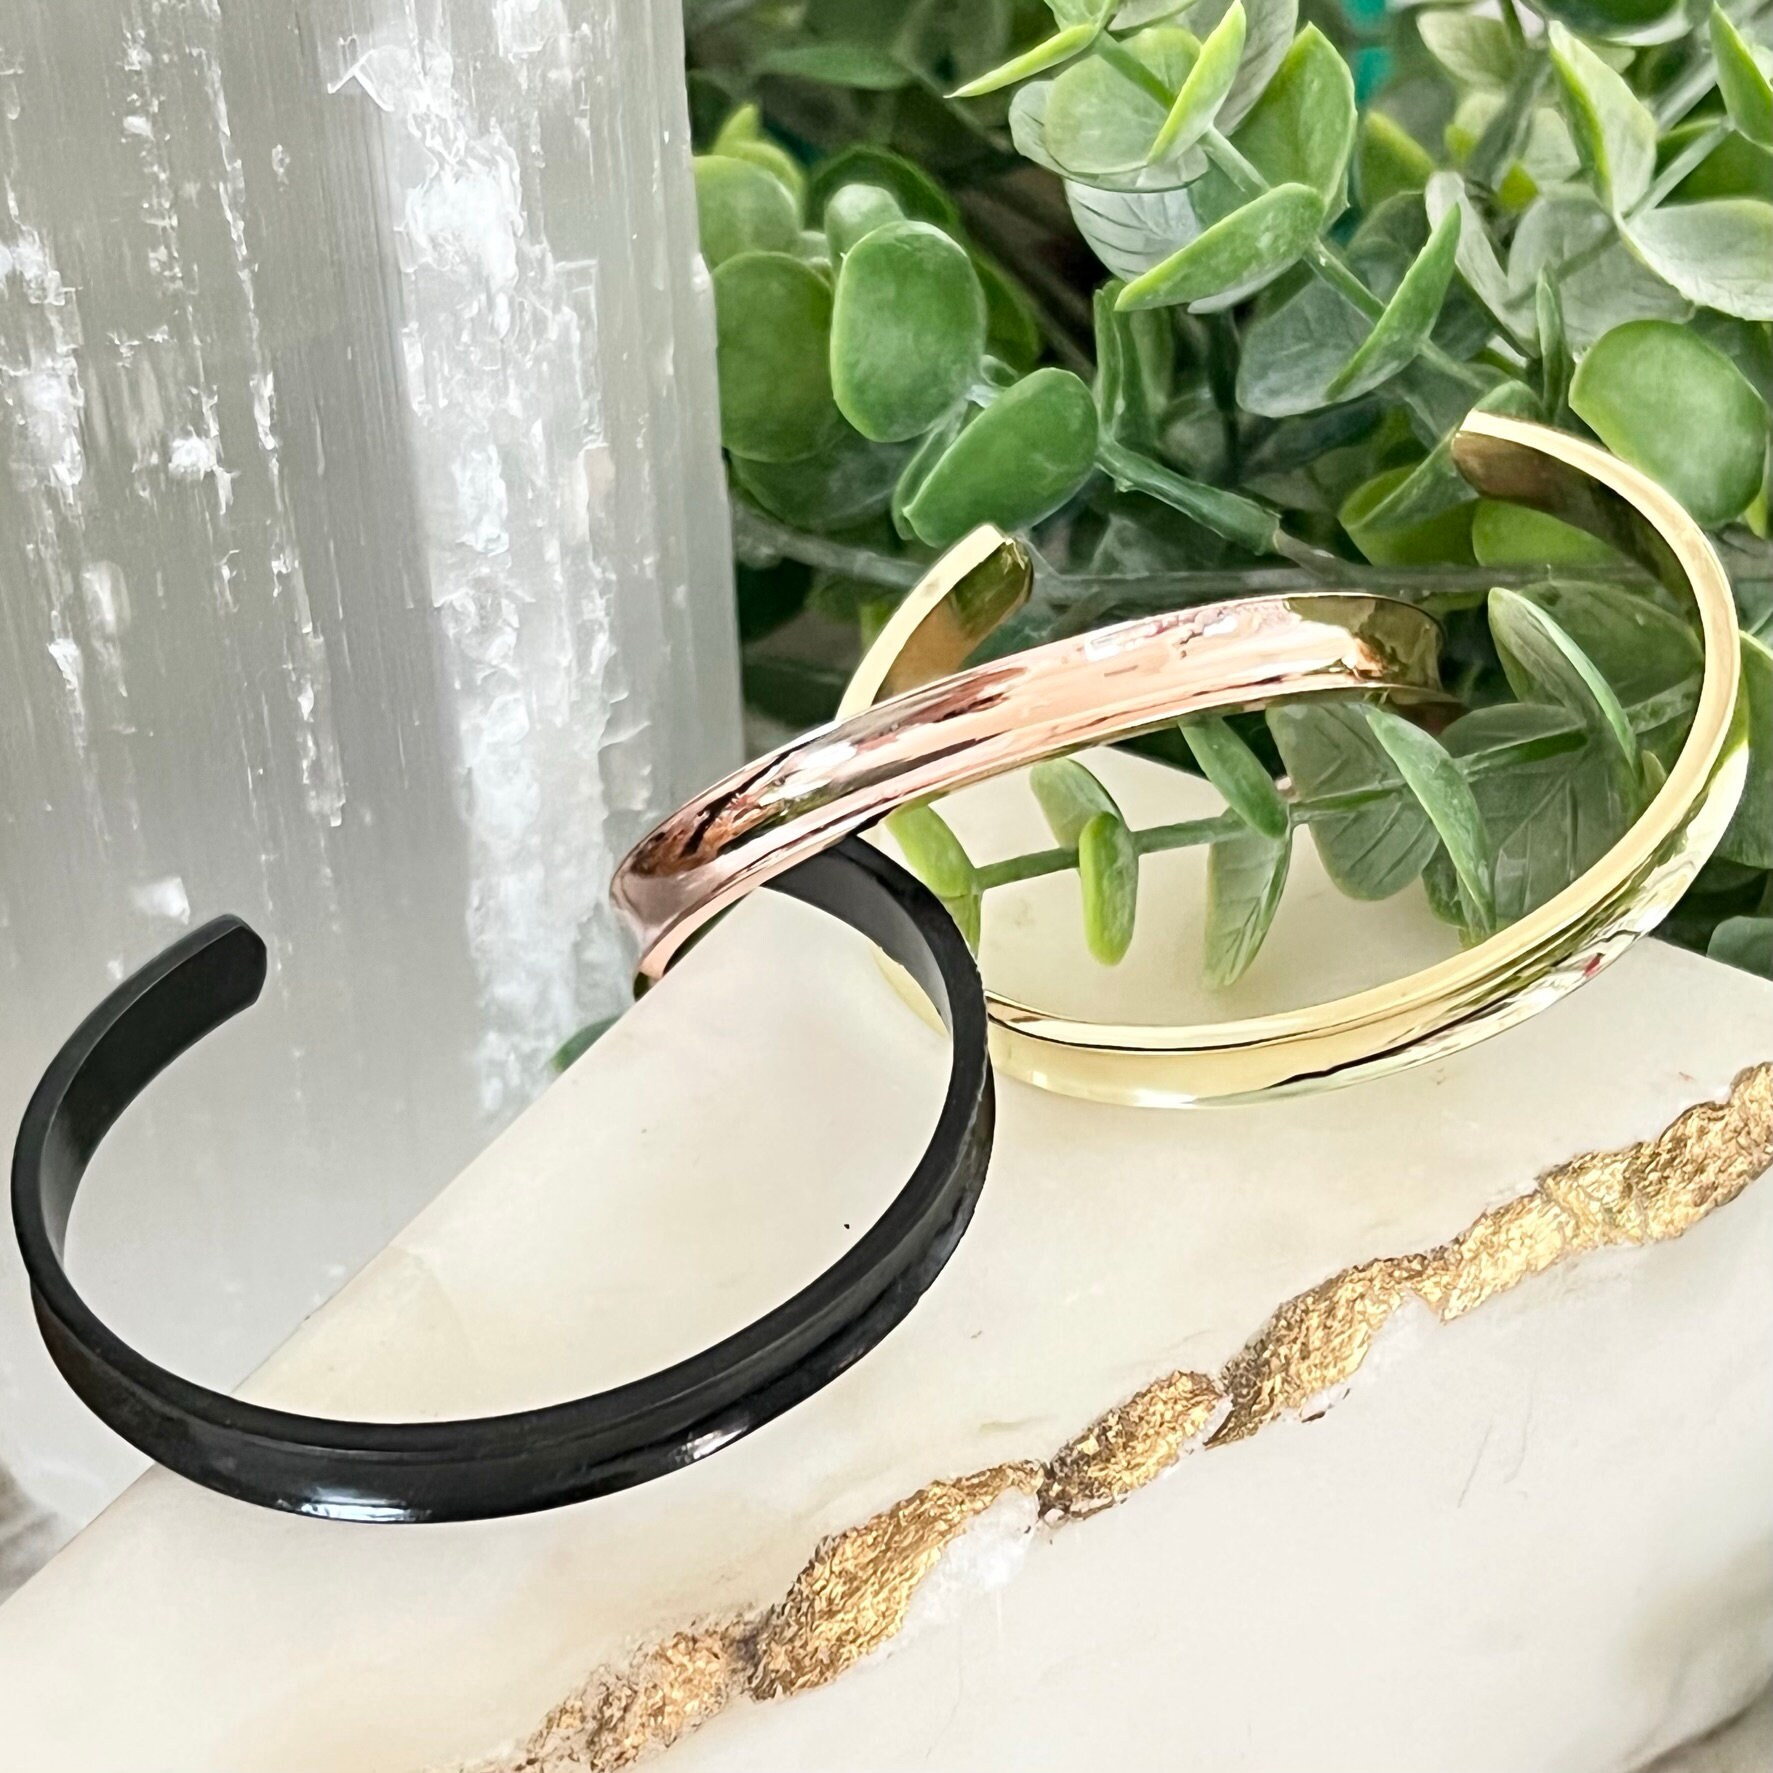 Hair Tie Cuff Bracelet Rubber Bands Bangle Gold GRAY Rose Party Bridal Prom